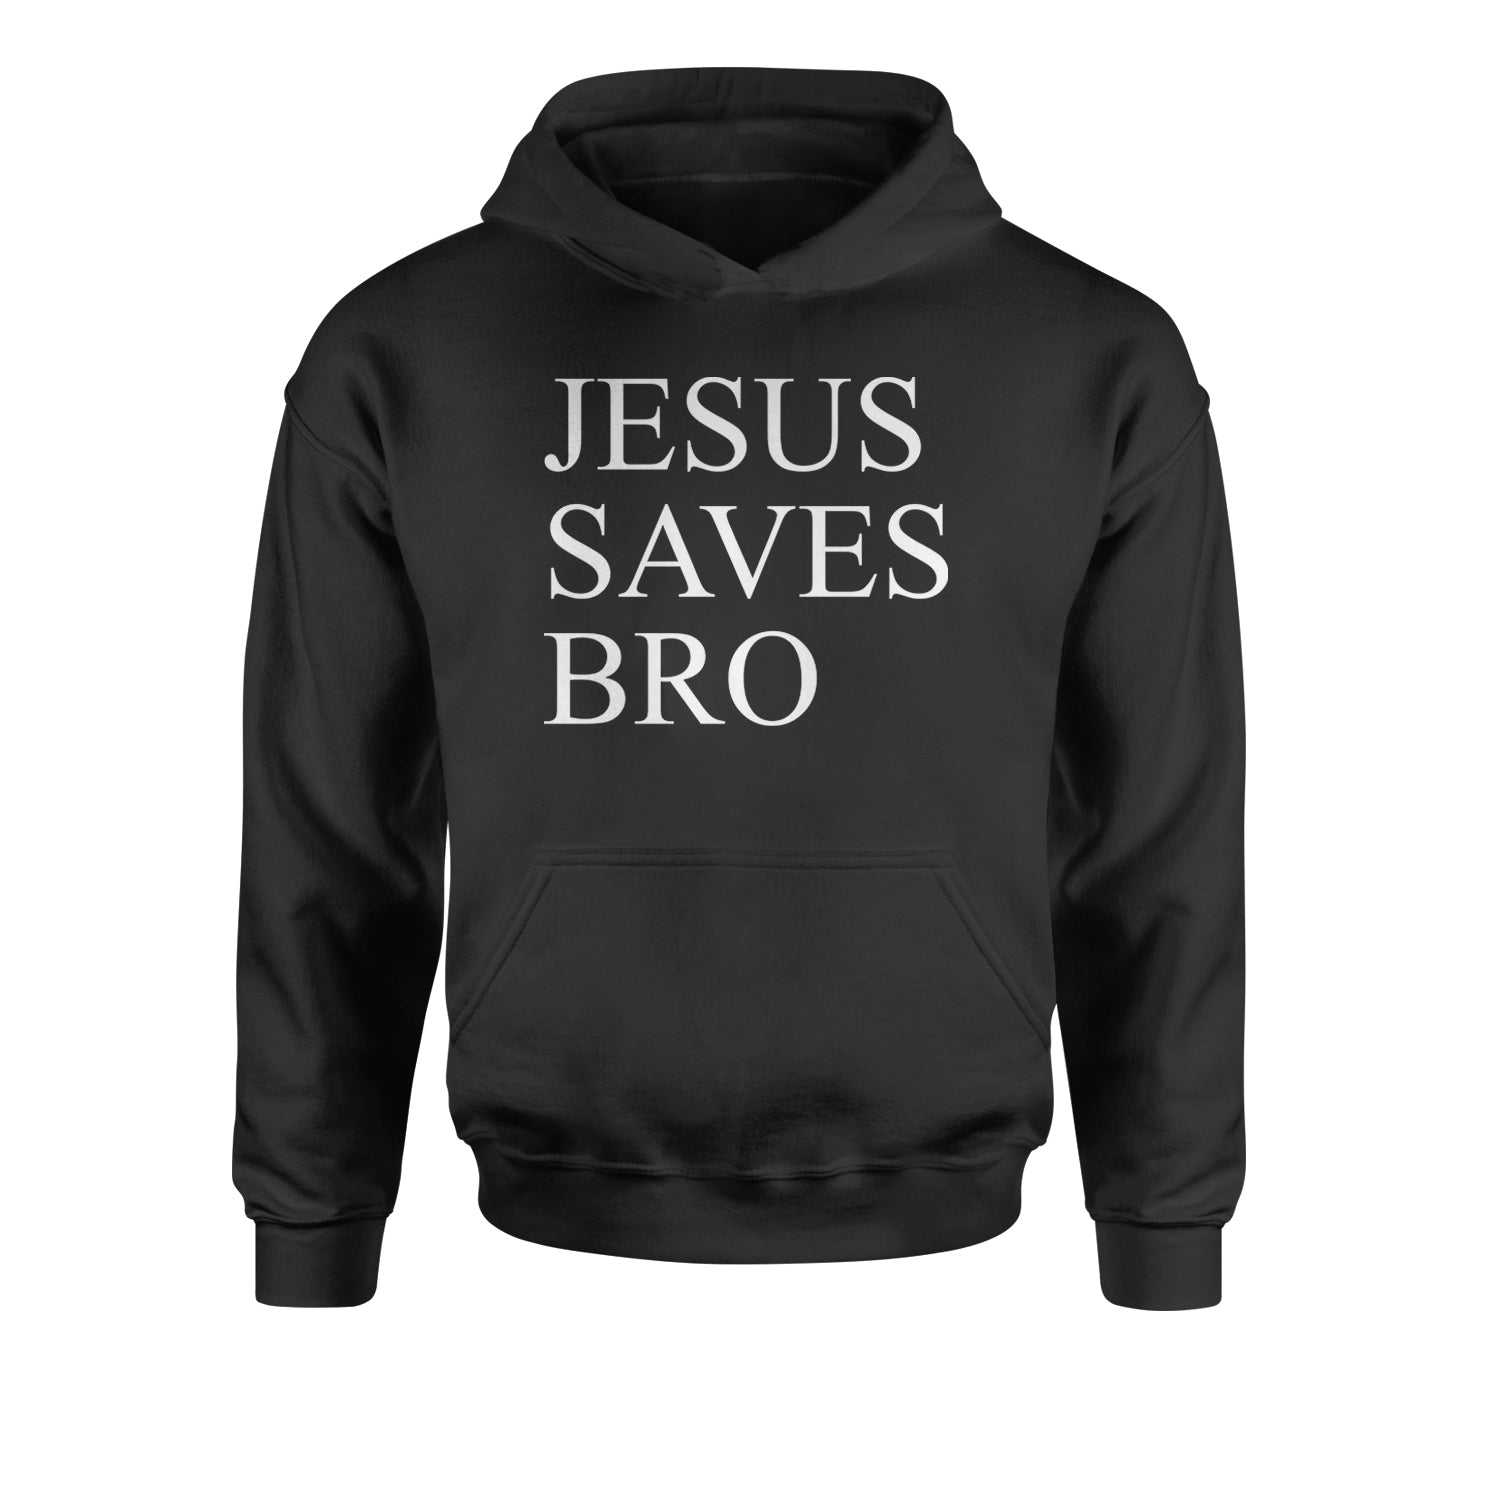 Jesus Saves Bro Youth-Sized Hoodie catholic, christian, christianity, church, jesus, religion, religuous by Expression Tees